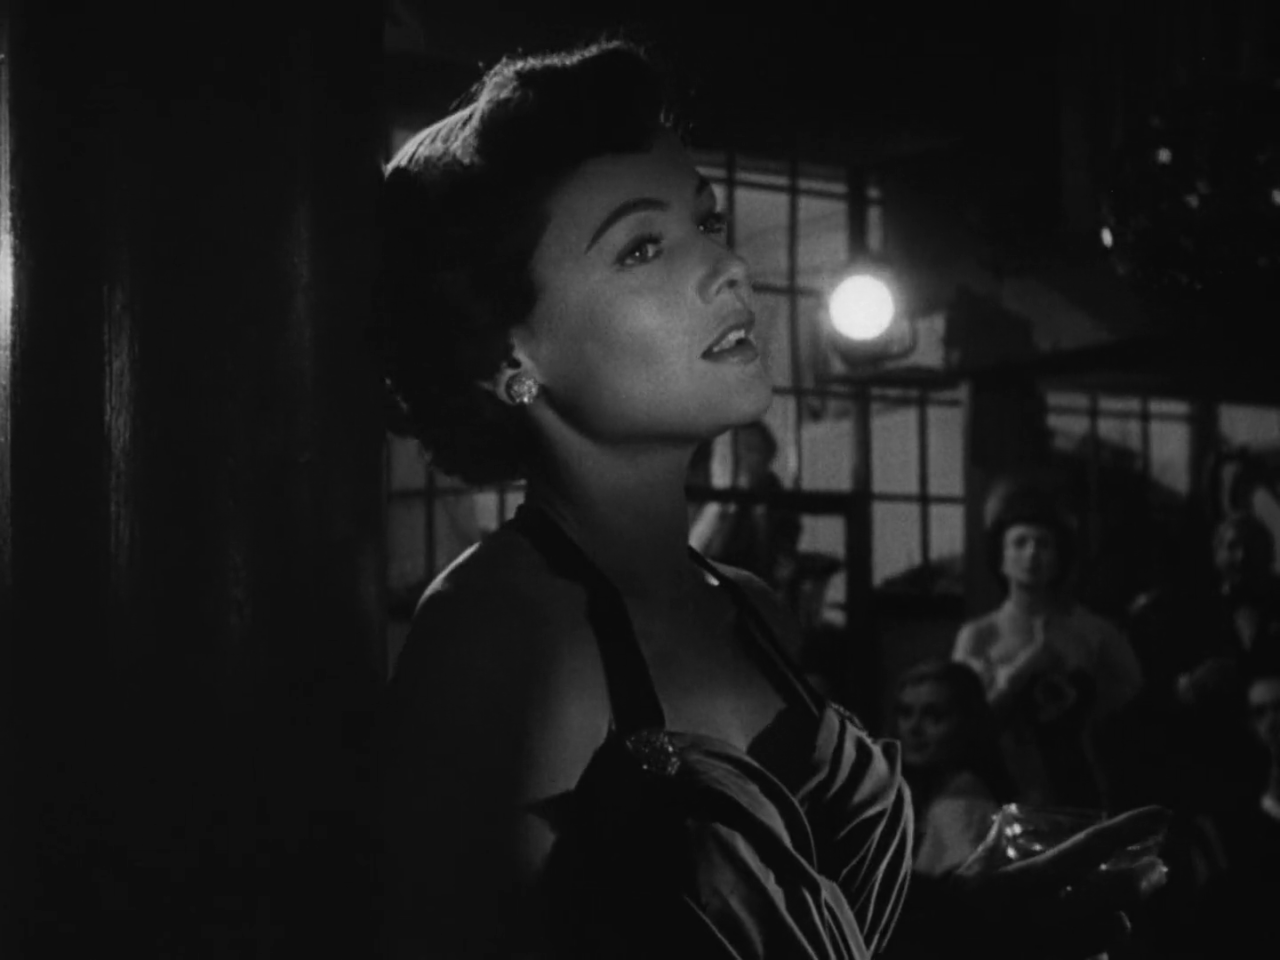 NIGHT AND THE CITY (1950)